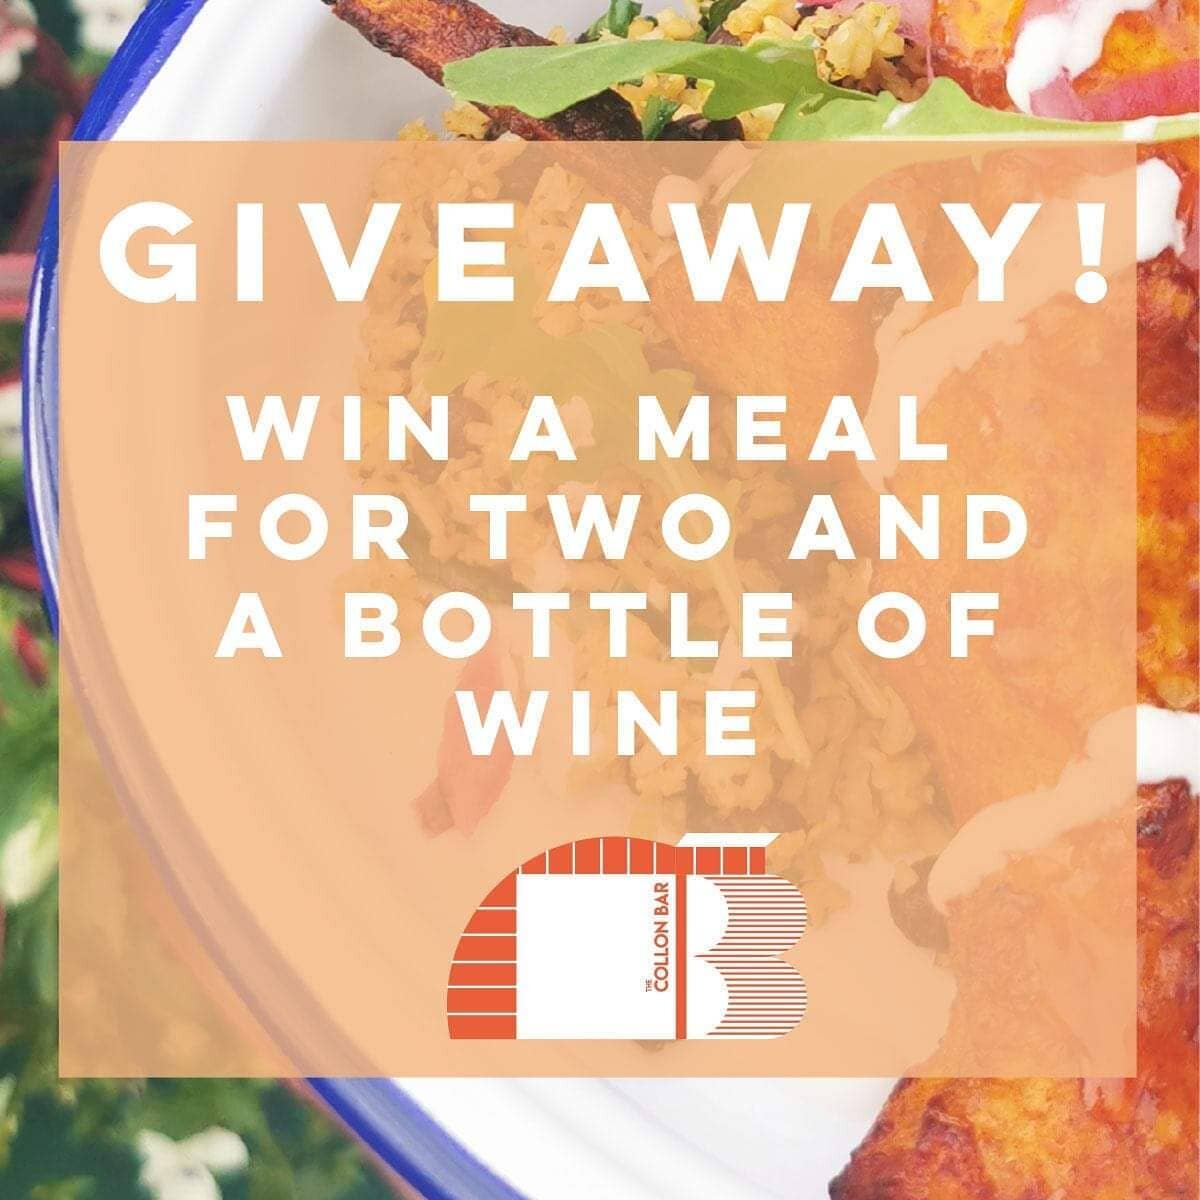 🎉🎉🎉GIVEAWAY🎉🎉🎉
Two more days to enter our competition, get sharing for your chance to win two main courses, two desserts and and a bottle of wine 🍷

🥇Link our Instagram page
🥈Like this post
🥉Comment on this post and tag two friends you thin